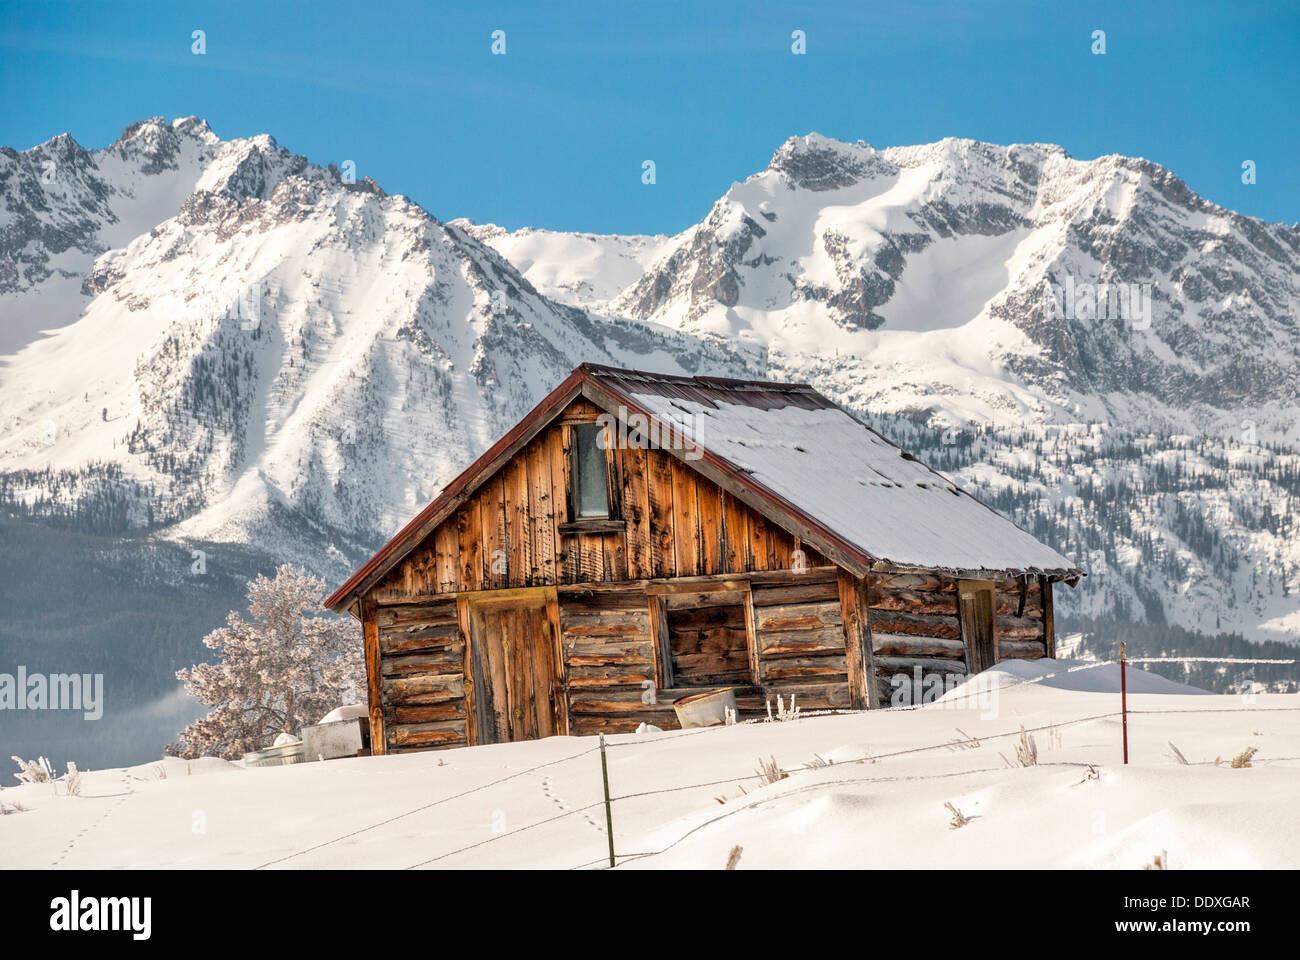 Snowy cold mountains with a wooden log cabin Stock Photo - Alamy